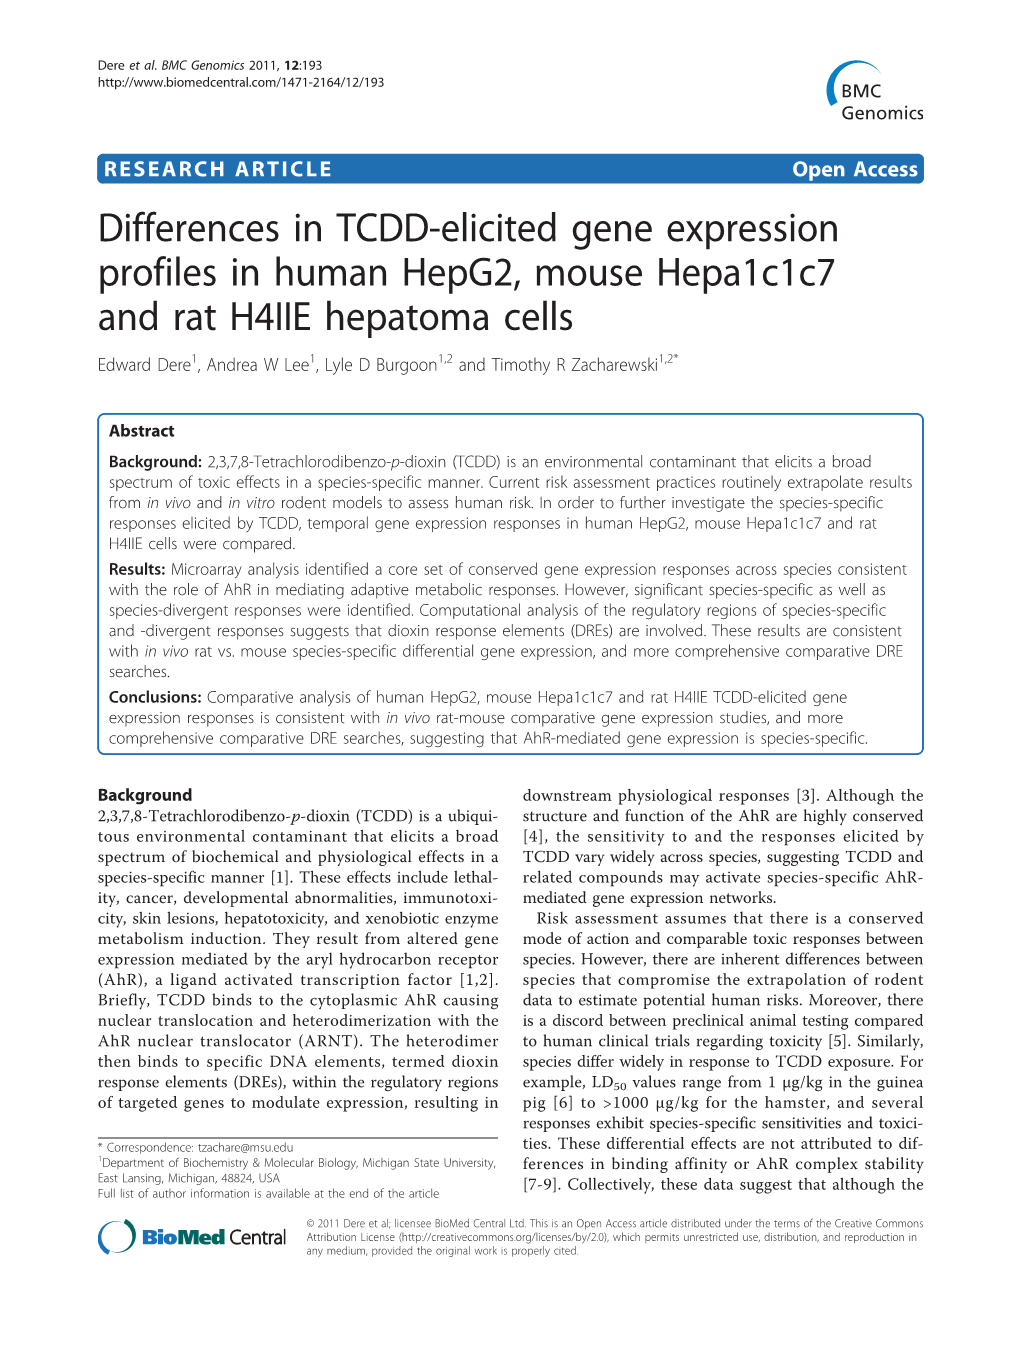 Differences in TCDD-Elicited Gene Expression Profiles in Human